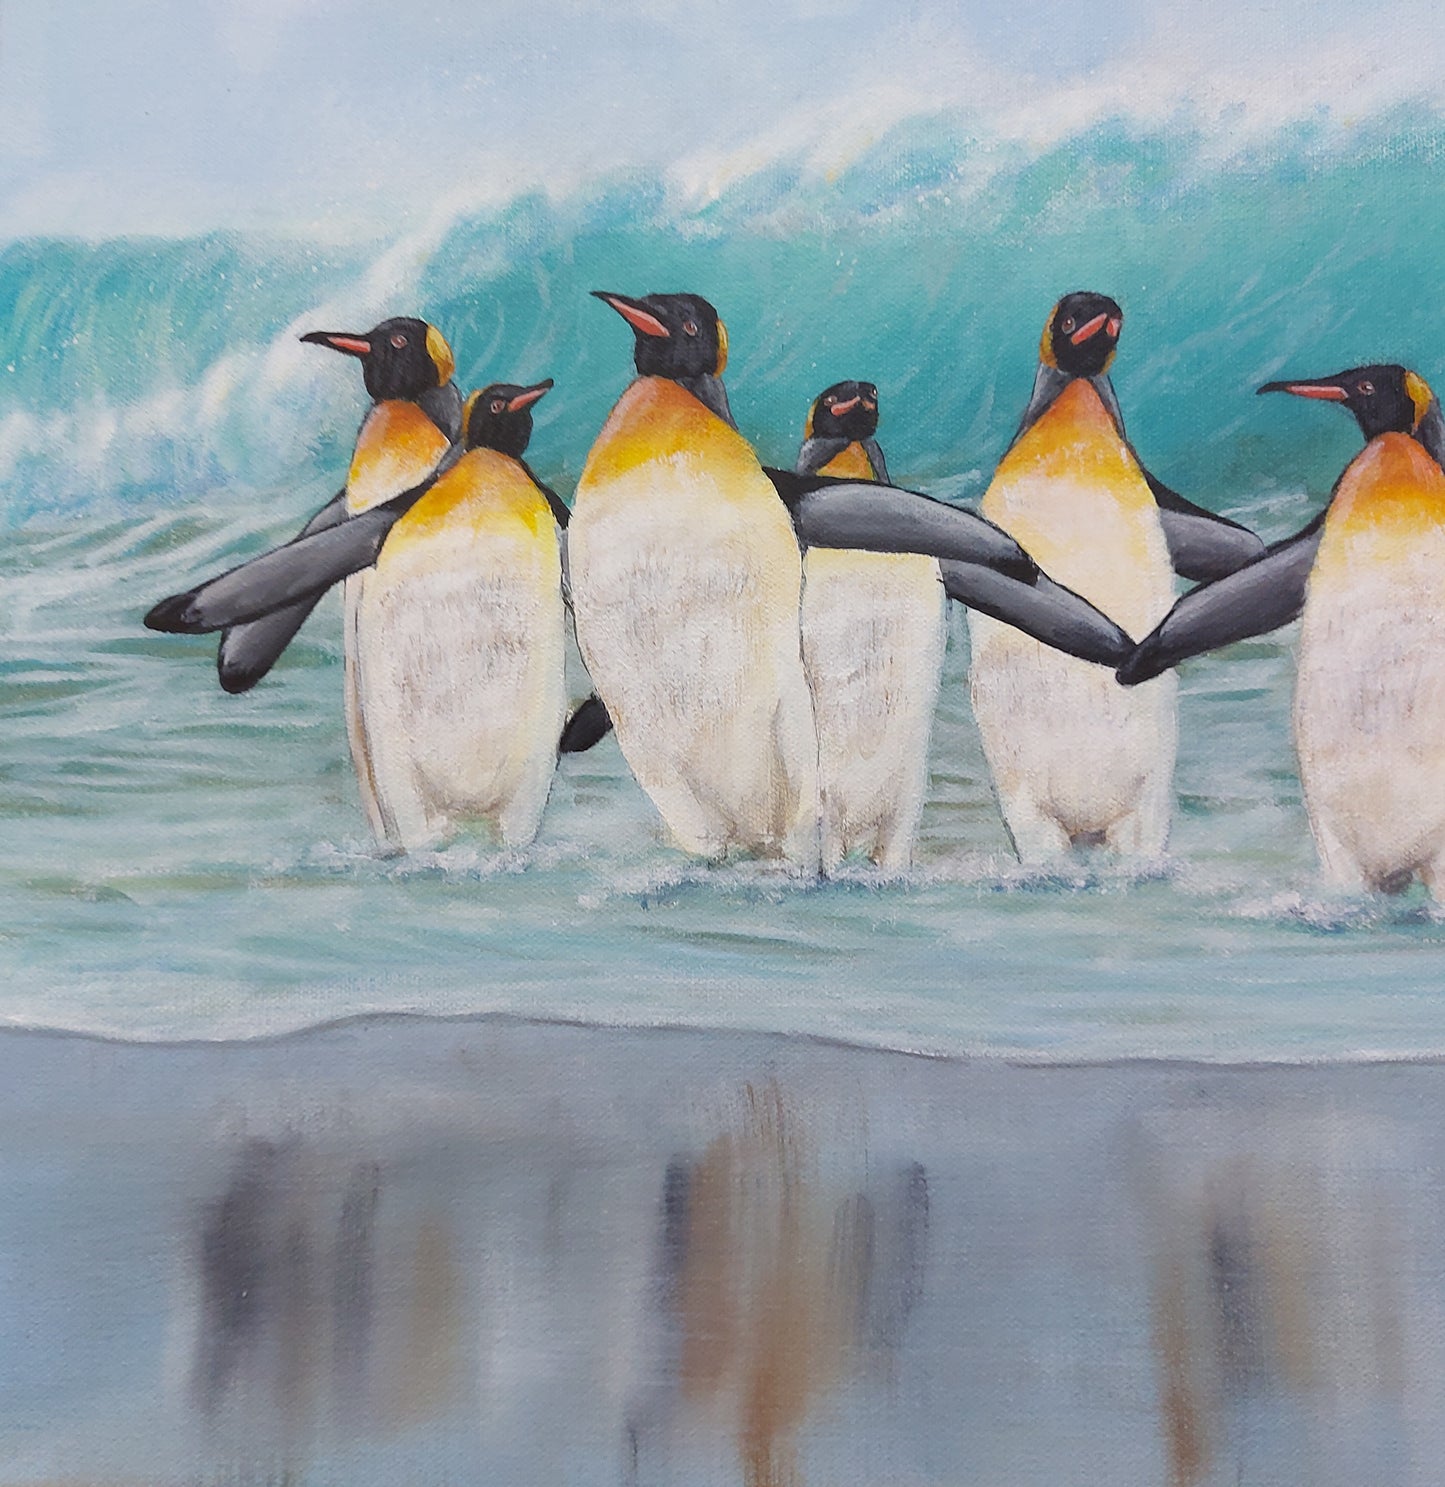 Shore Waddle is an acrylic painting by Katherine Polack. The painting is of a large group of penguins on the seashore watching their reflections as a bright turquoise wave forms behind them against the gloomy grey sky. The painting is 20 x 30" acrylic on canvas.